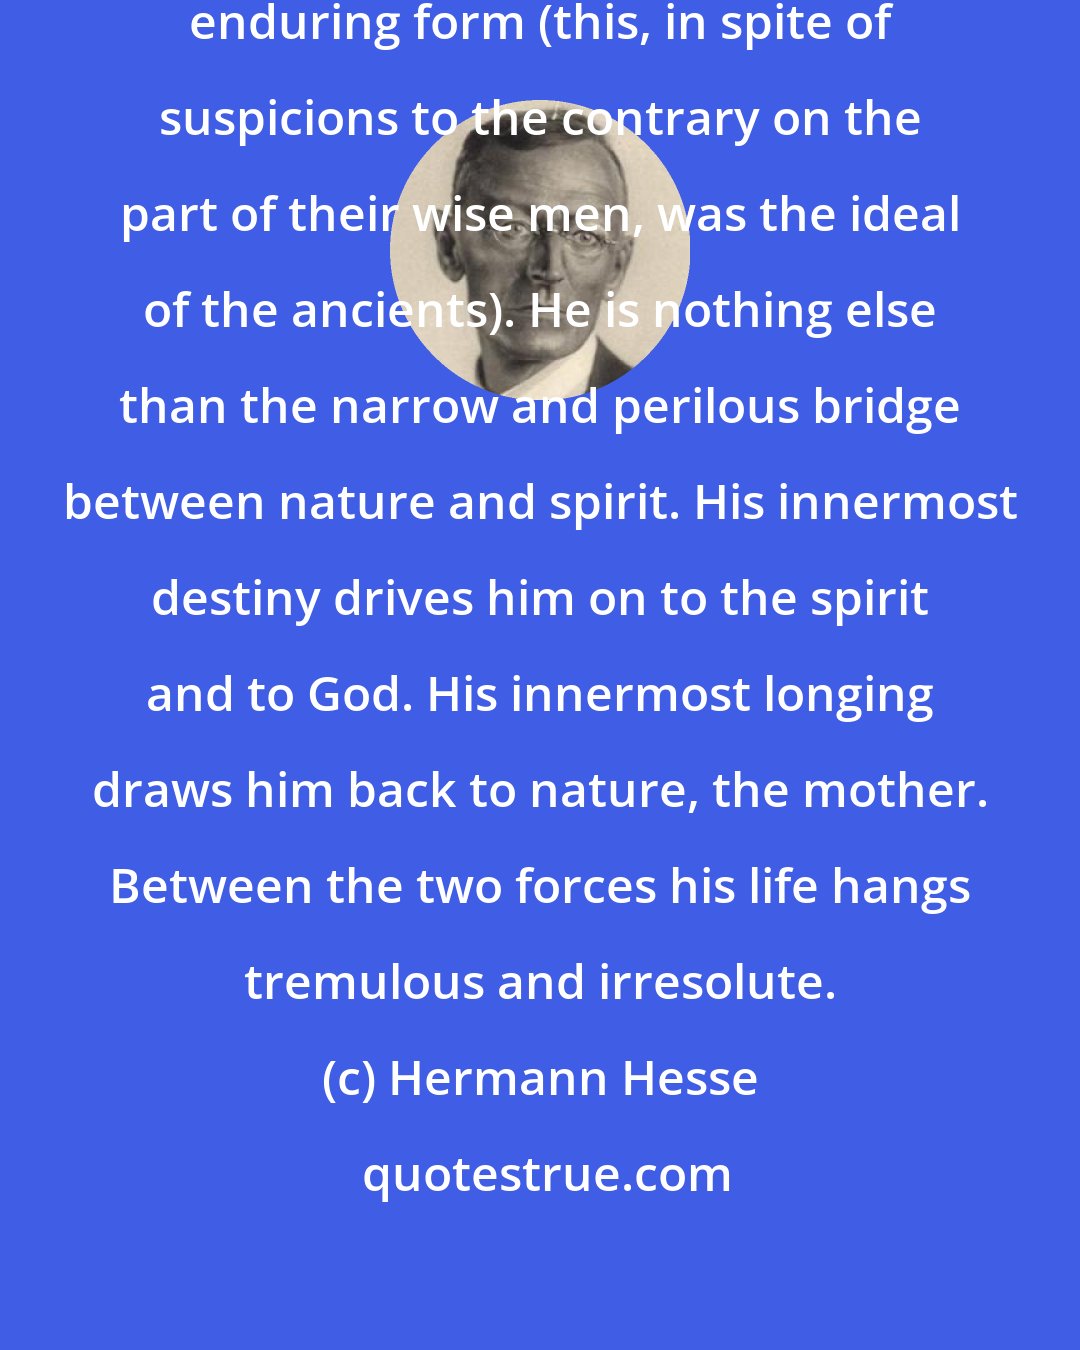 Hermann Hesse: Man is not by any means of fixed and enduring form (this, in spite of suspicions to the contrary on the part of their wise men, was the ideal of the ancients). He is nothing else than the narrow and perilous bridge between nature and spirit. His innermost destiny drives him on to the spirit and to God. His innermost longing draws him back to nature, the mother. Between the two forces his life hangs tremulous and irresolute.